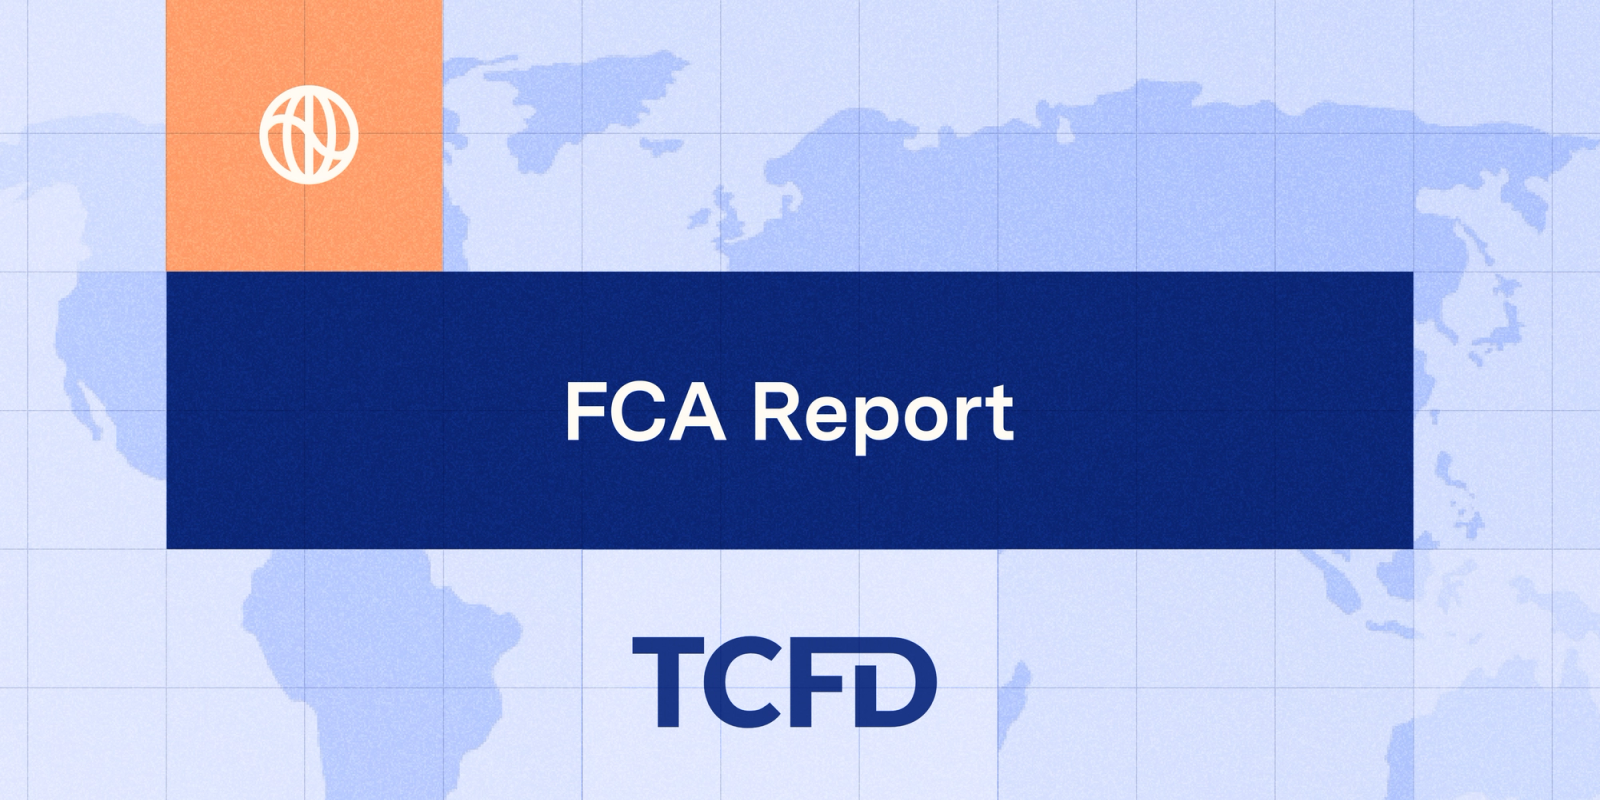 FCA report on TCFD-aligned disclosures with Watershed logo